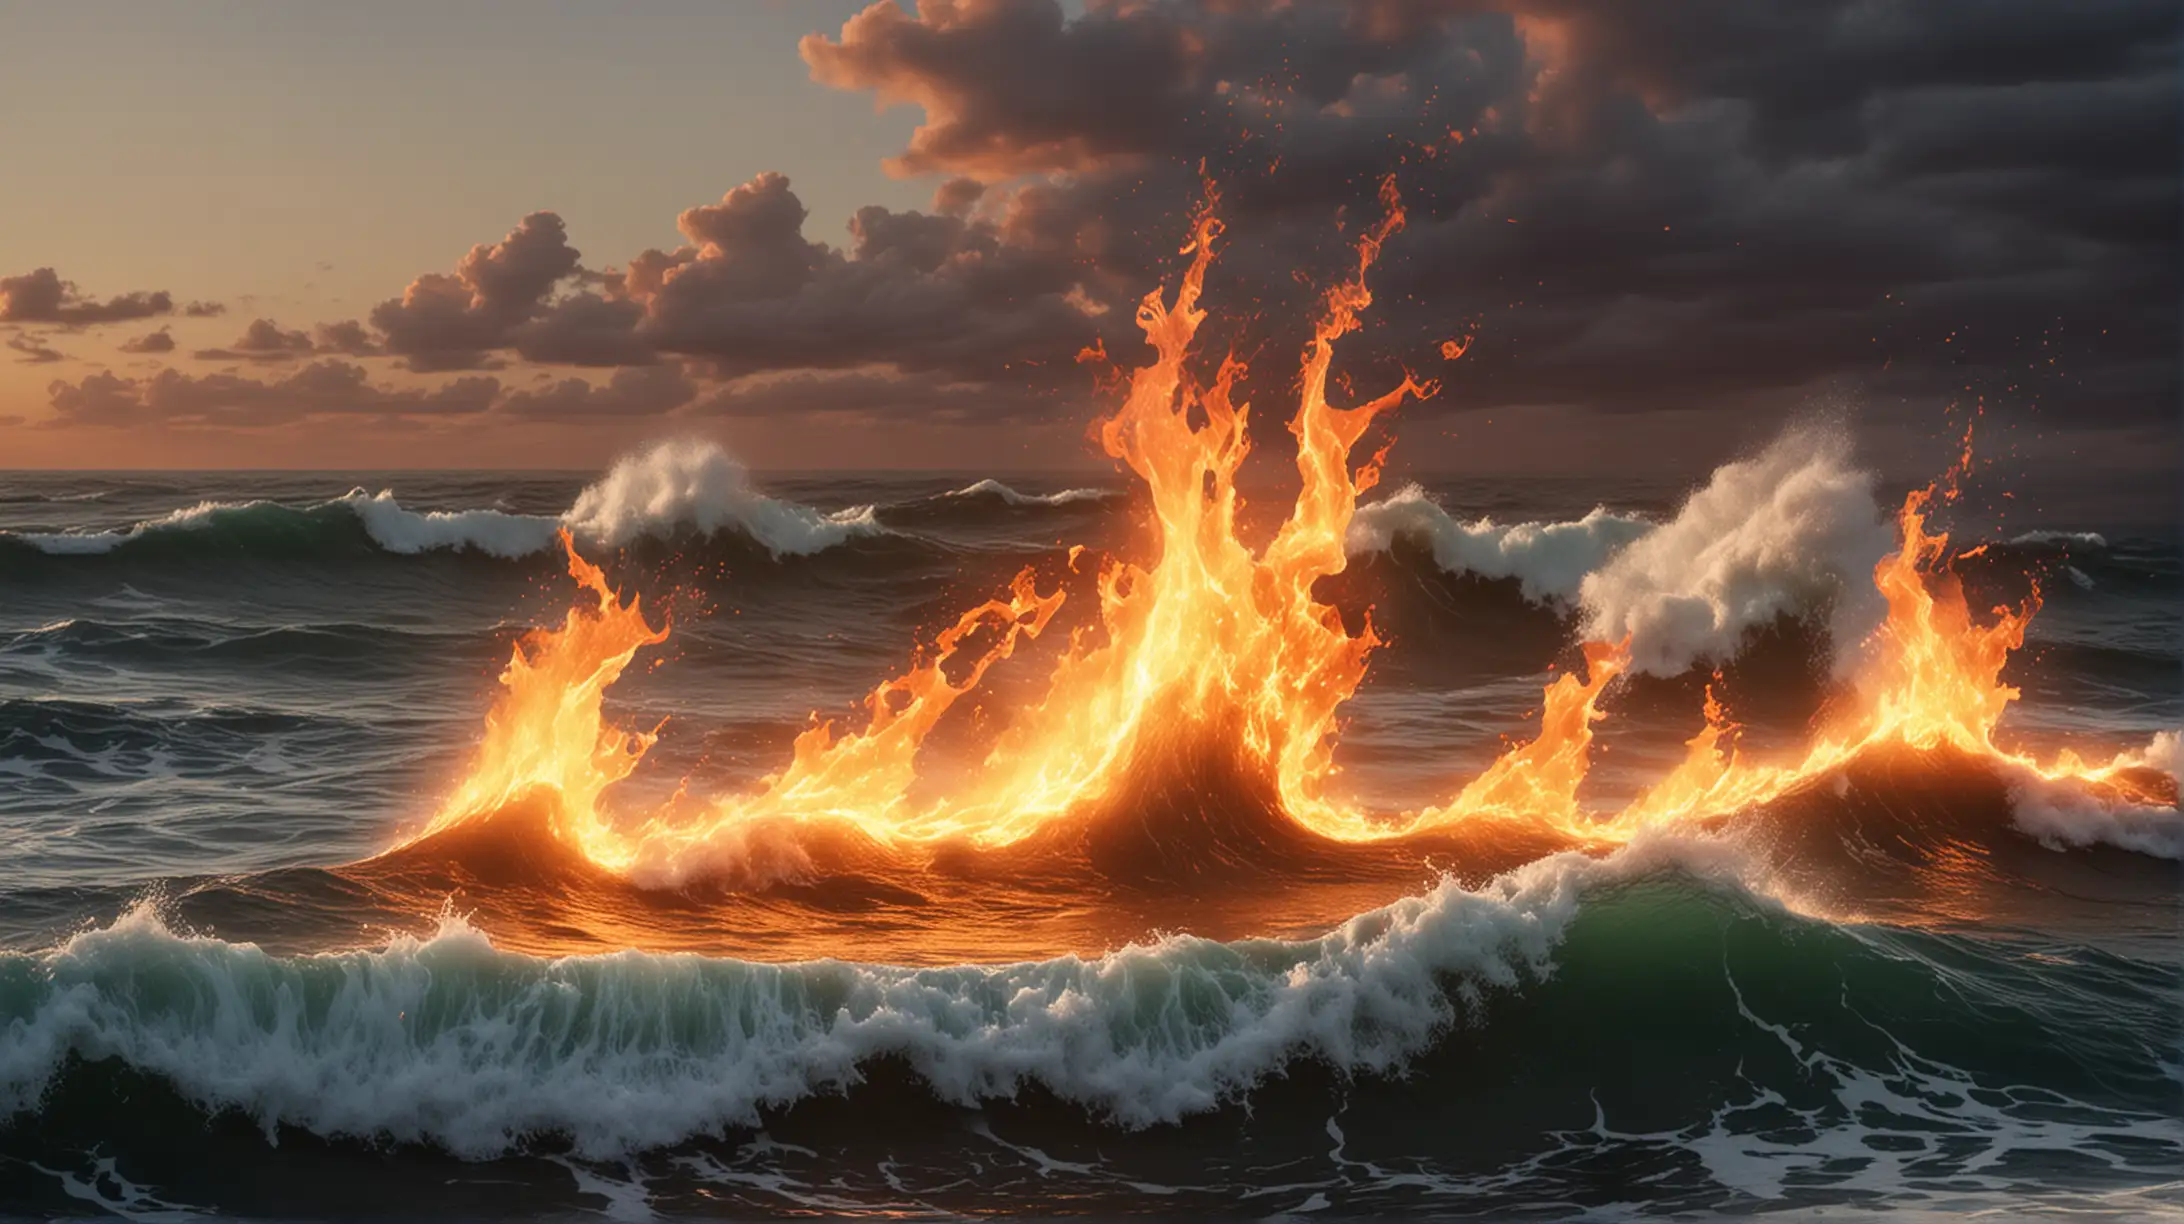 create an image that shows an ocean with waves with fire 